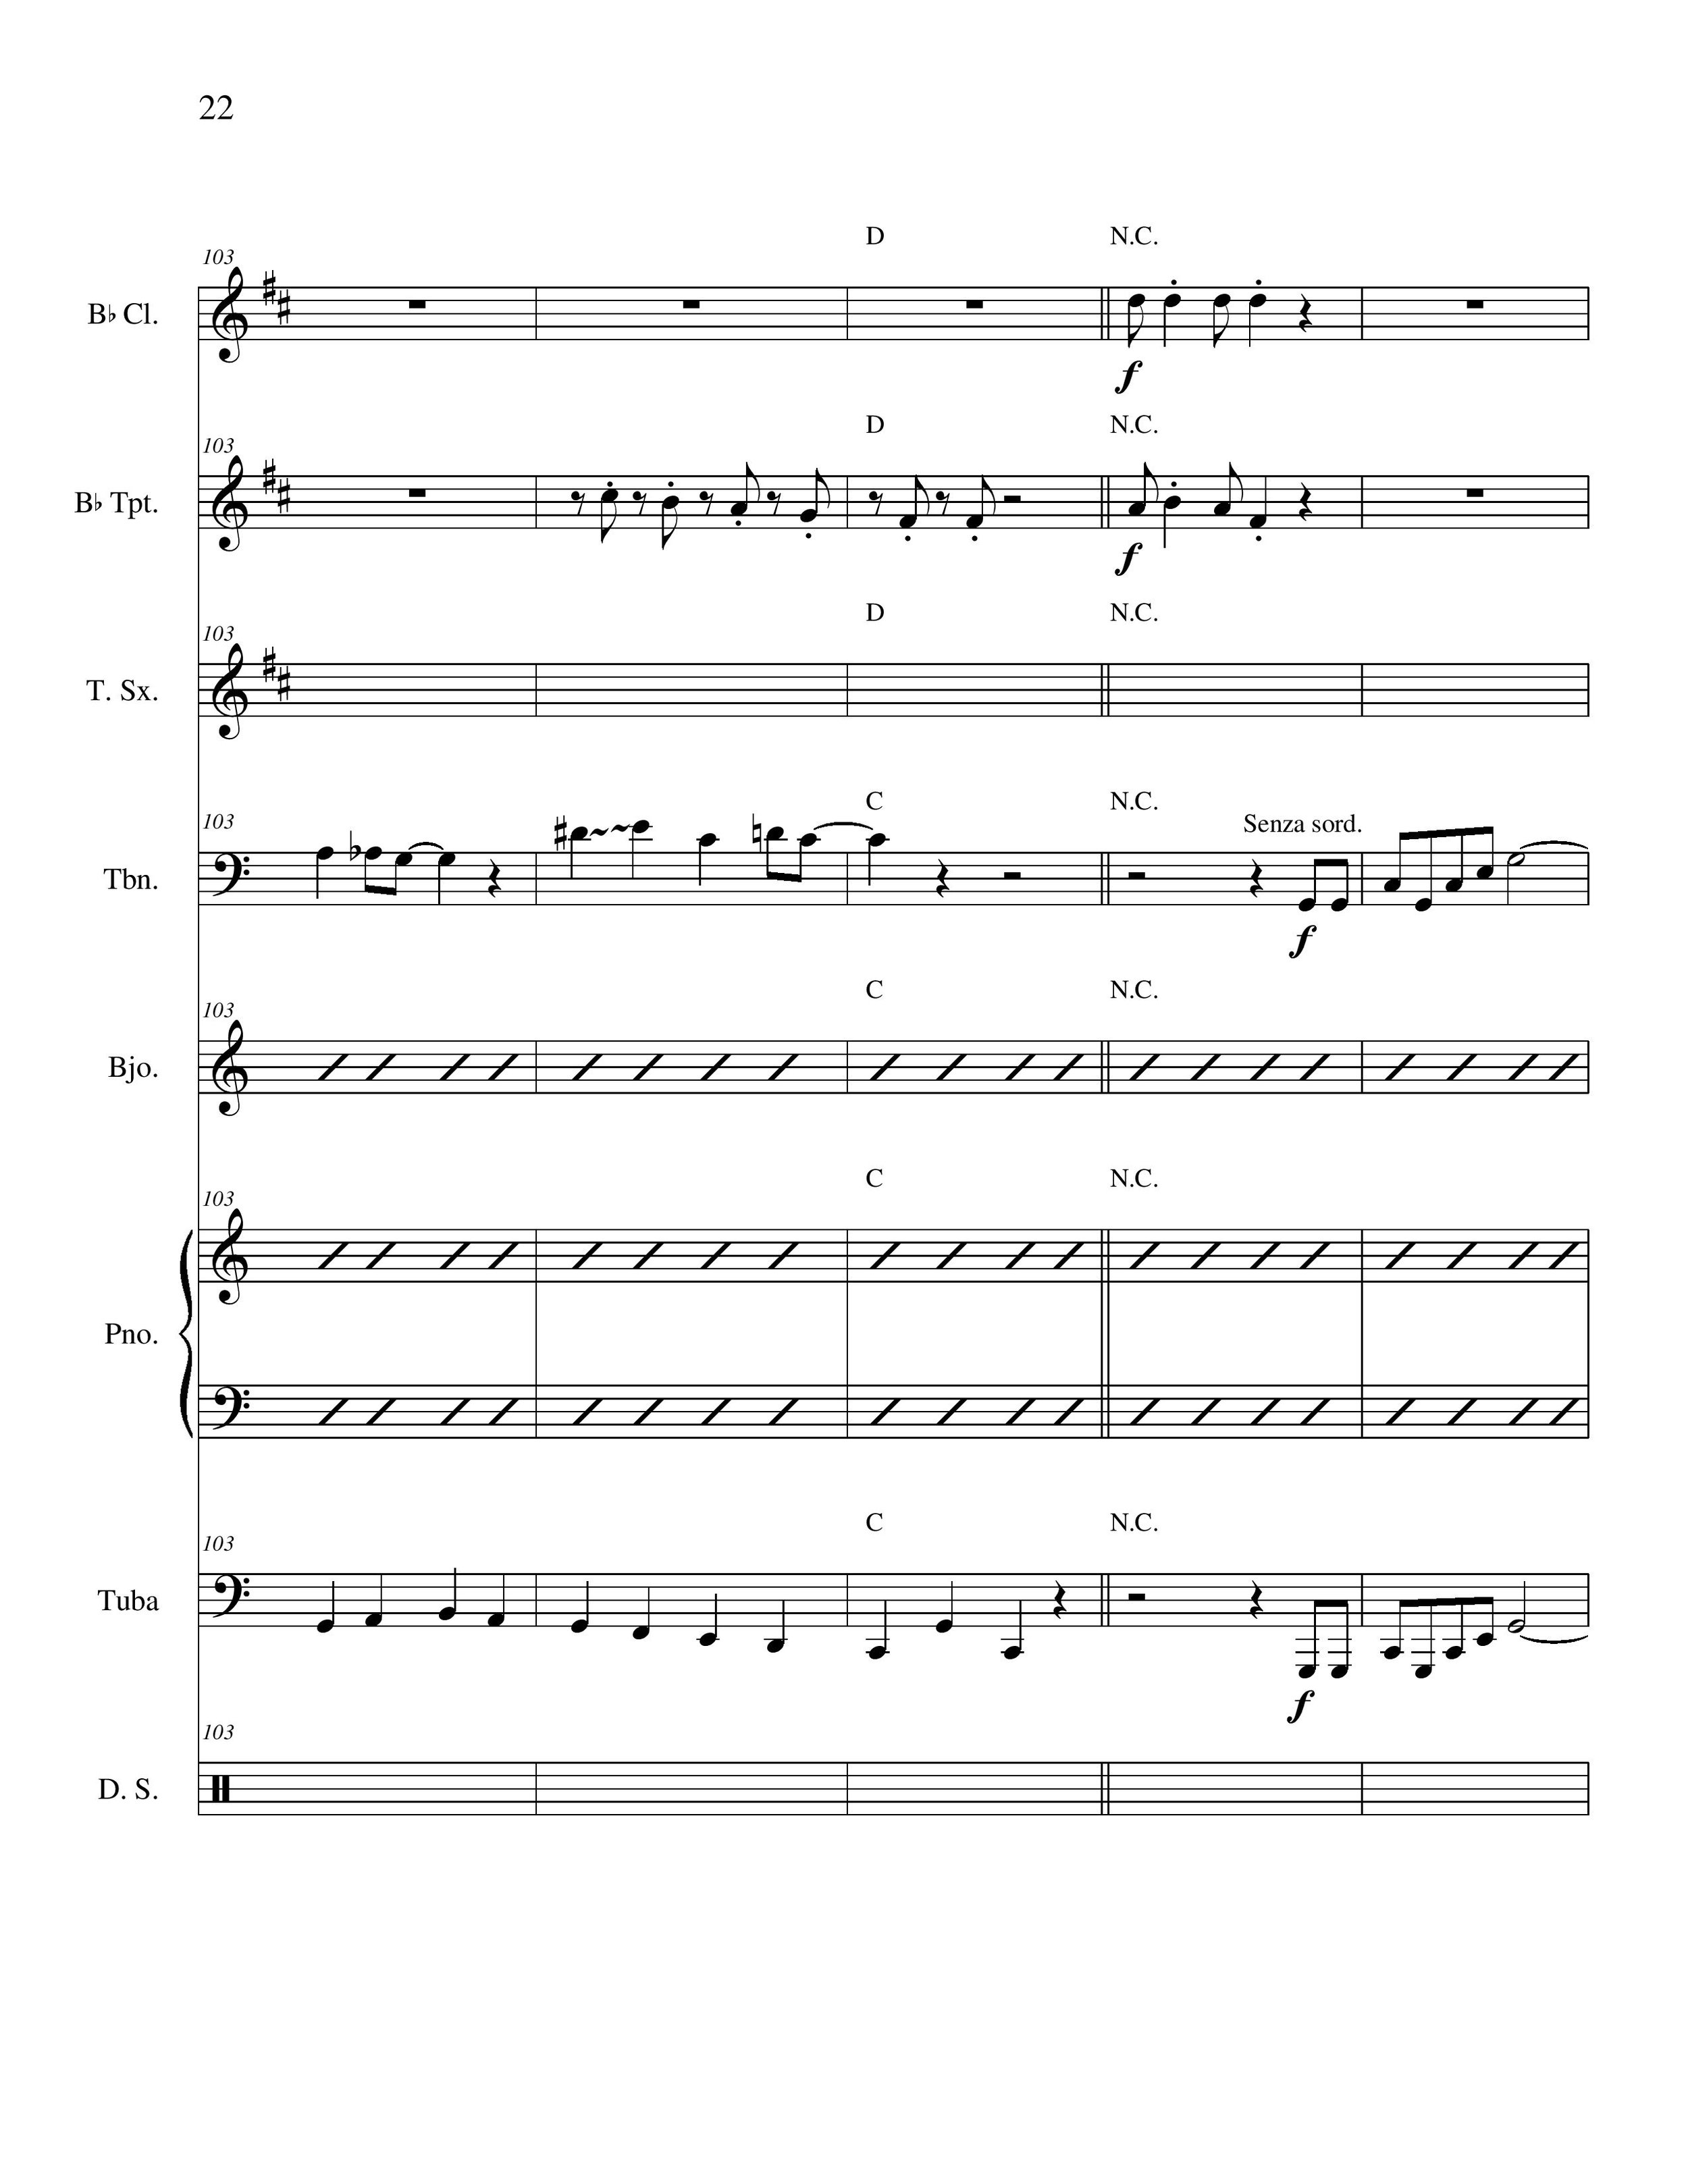 Rudolph the Red-Nosed Reindeer - Score_22.jpg